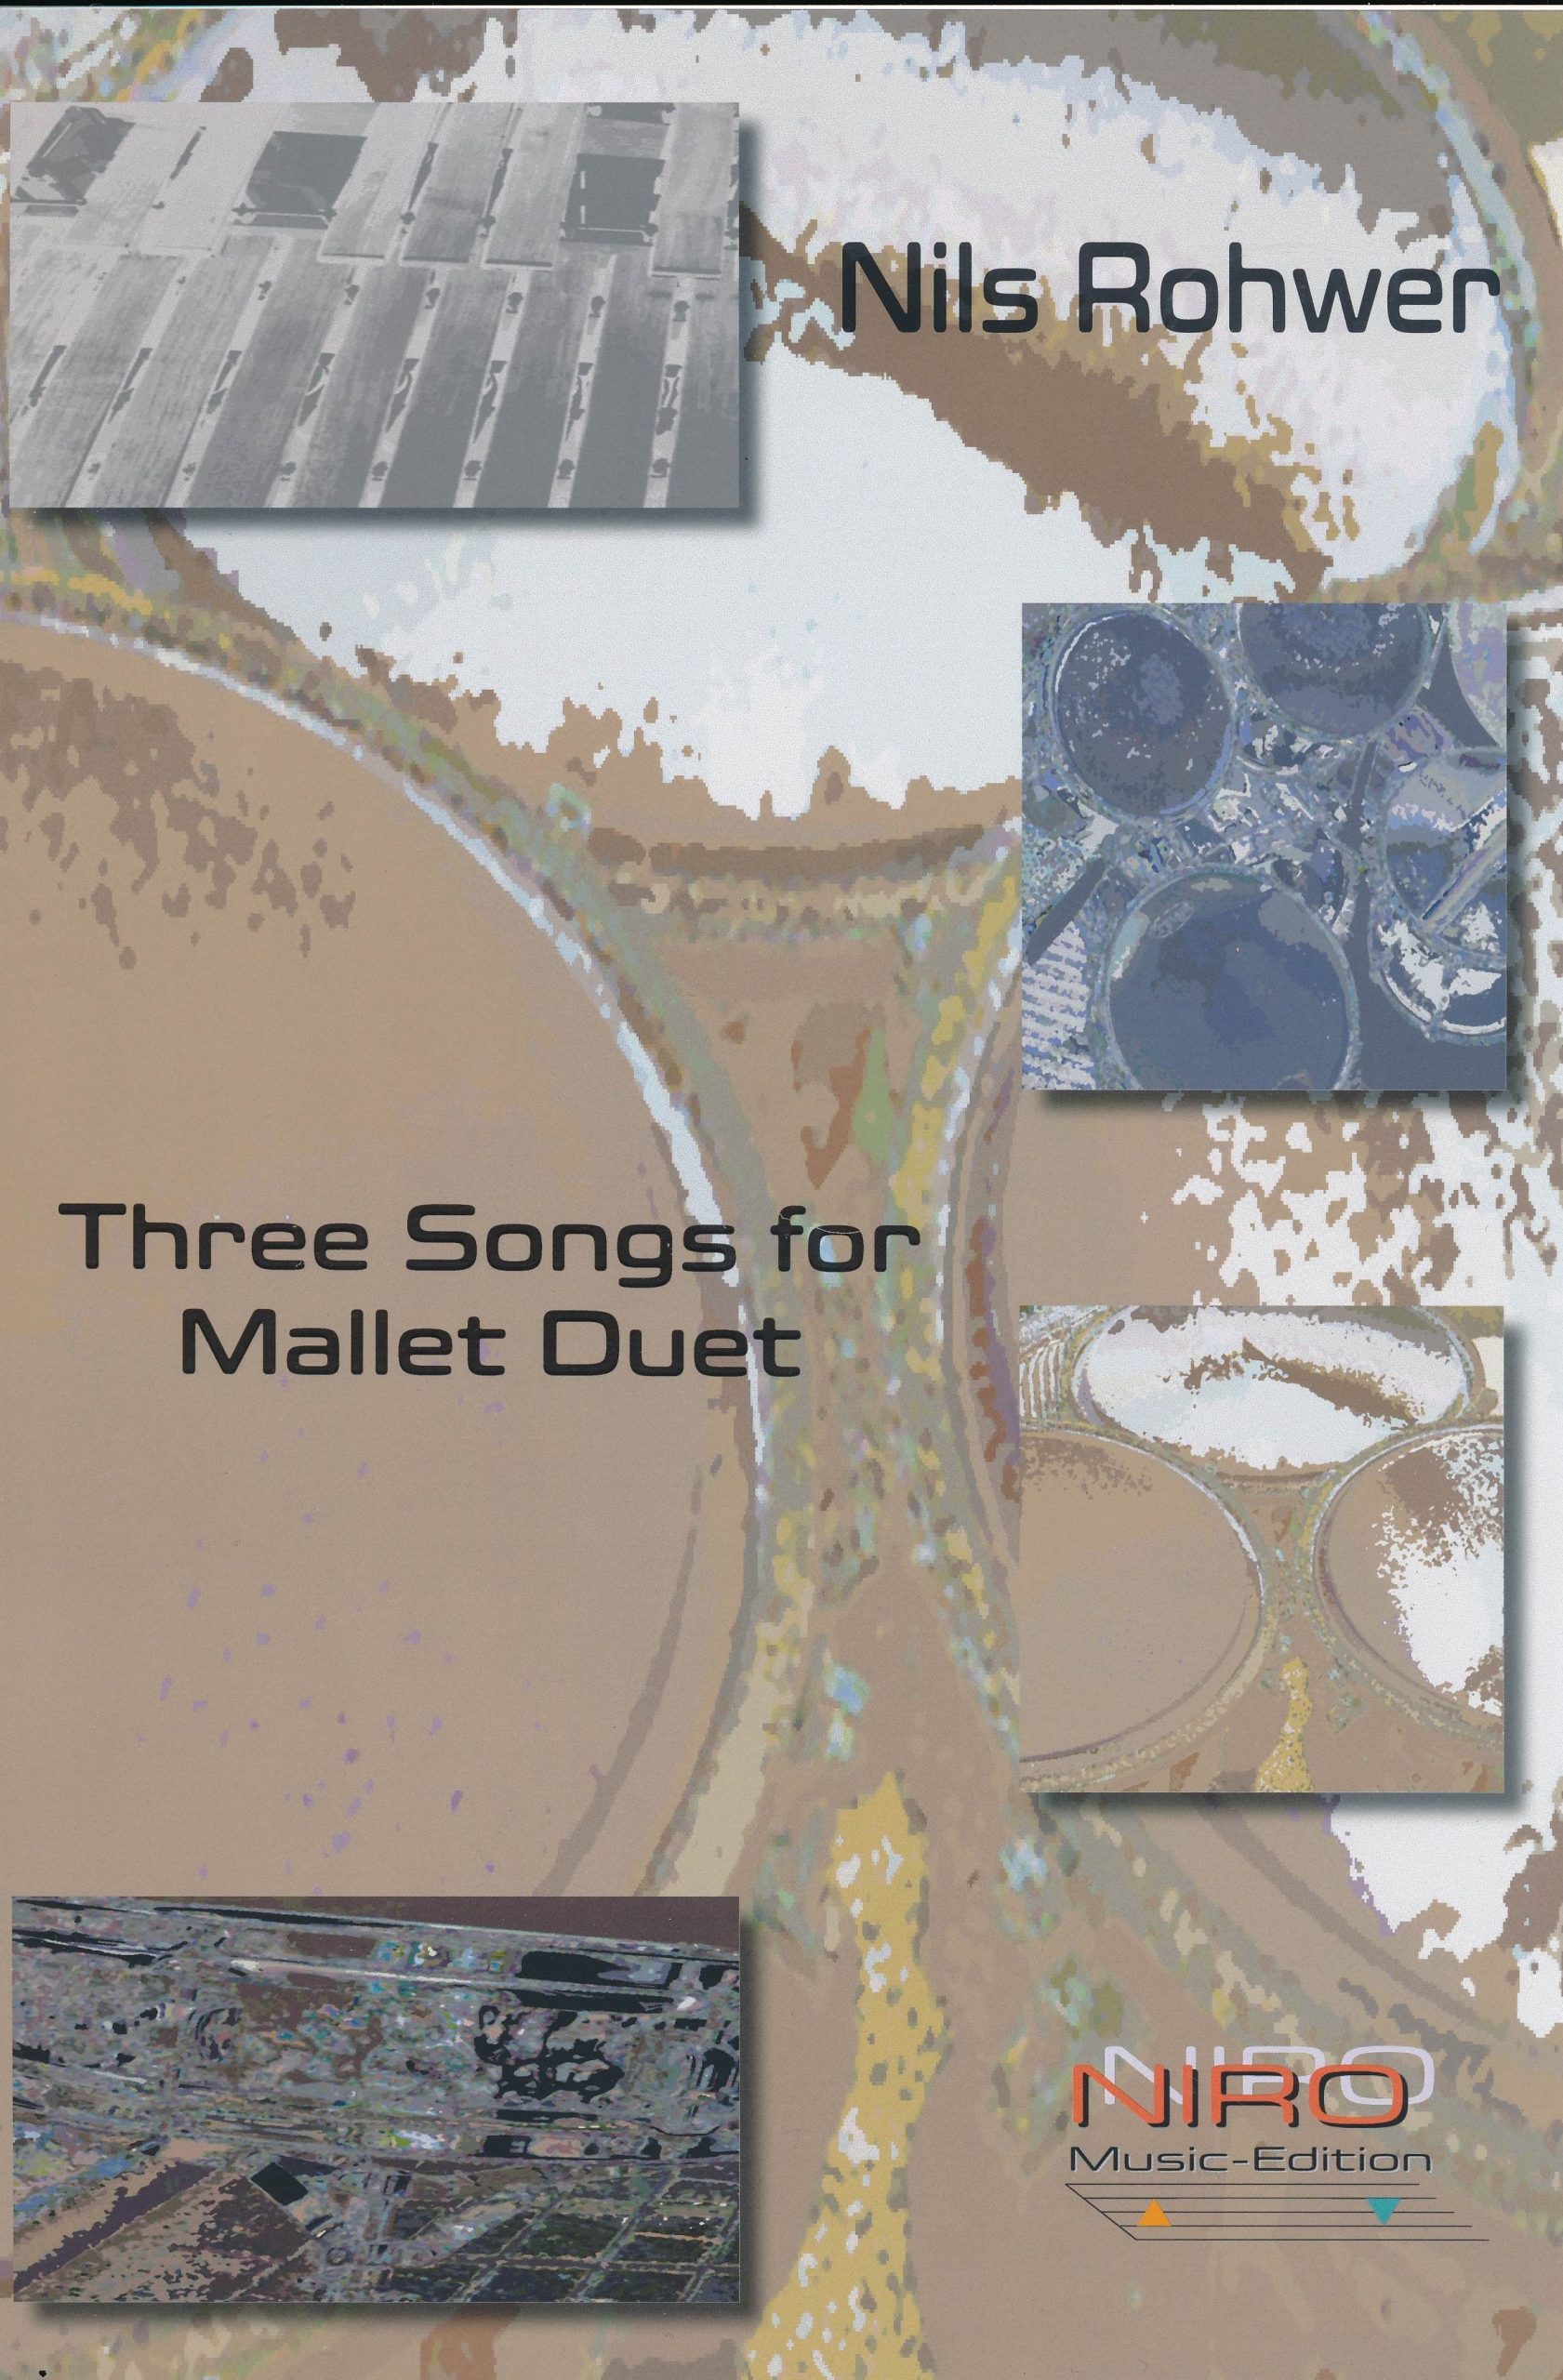 Three Songs for Mallet Duet by Nils Rohwer